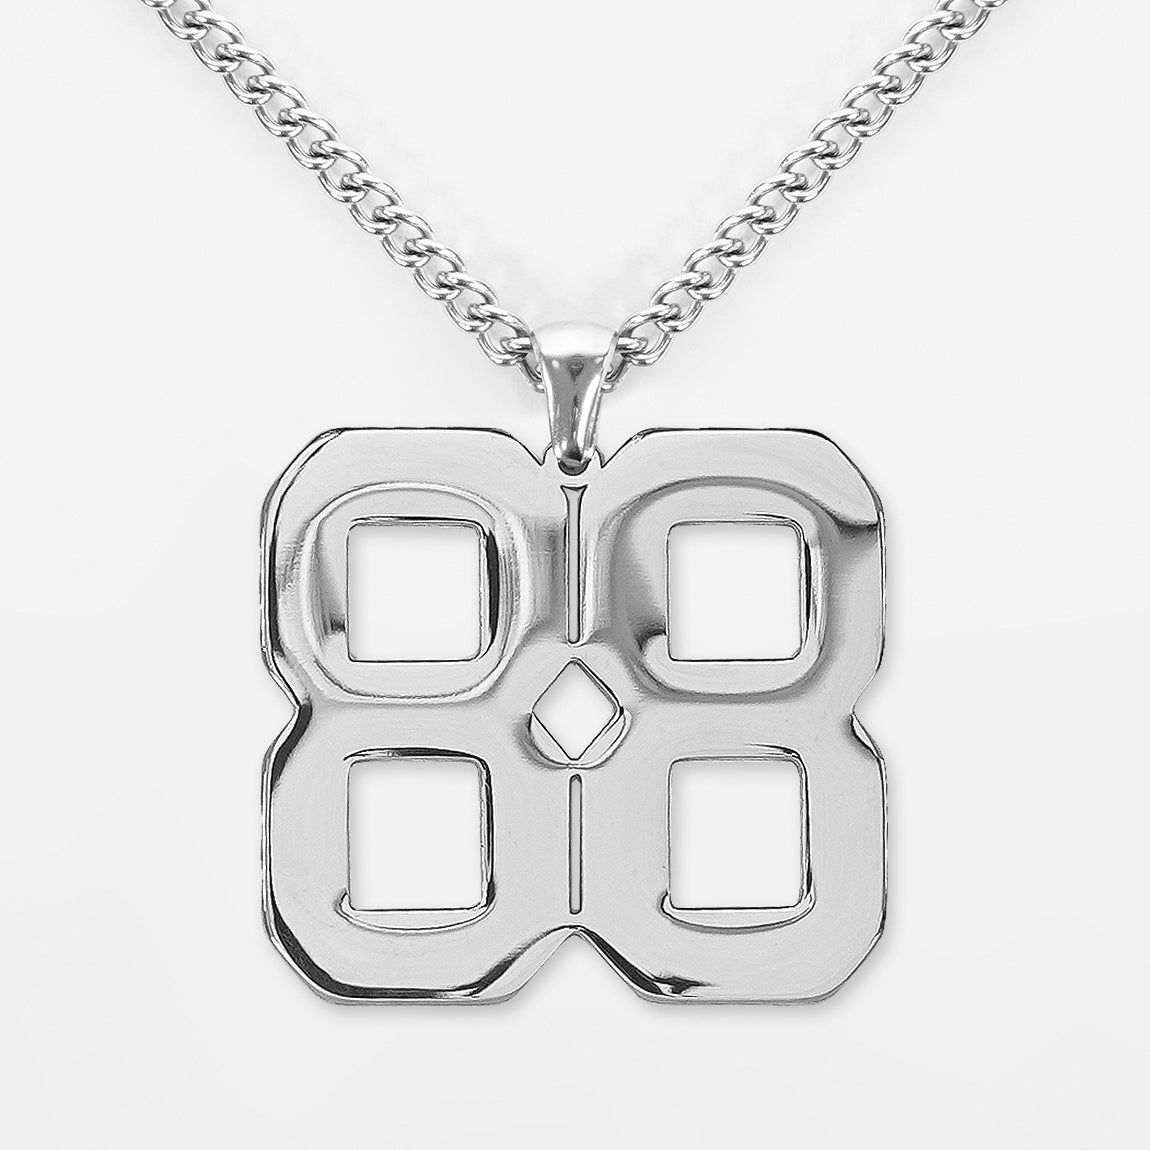 88 Number Pendant with Chain Necklace - Stainless Steel